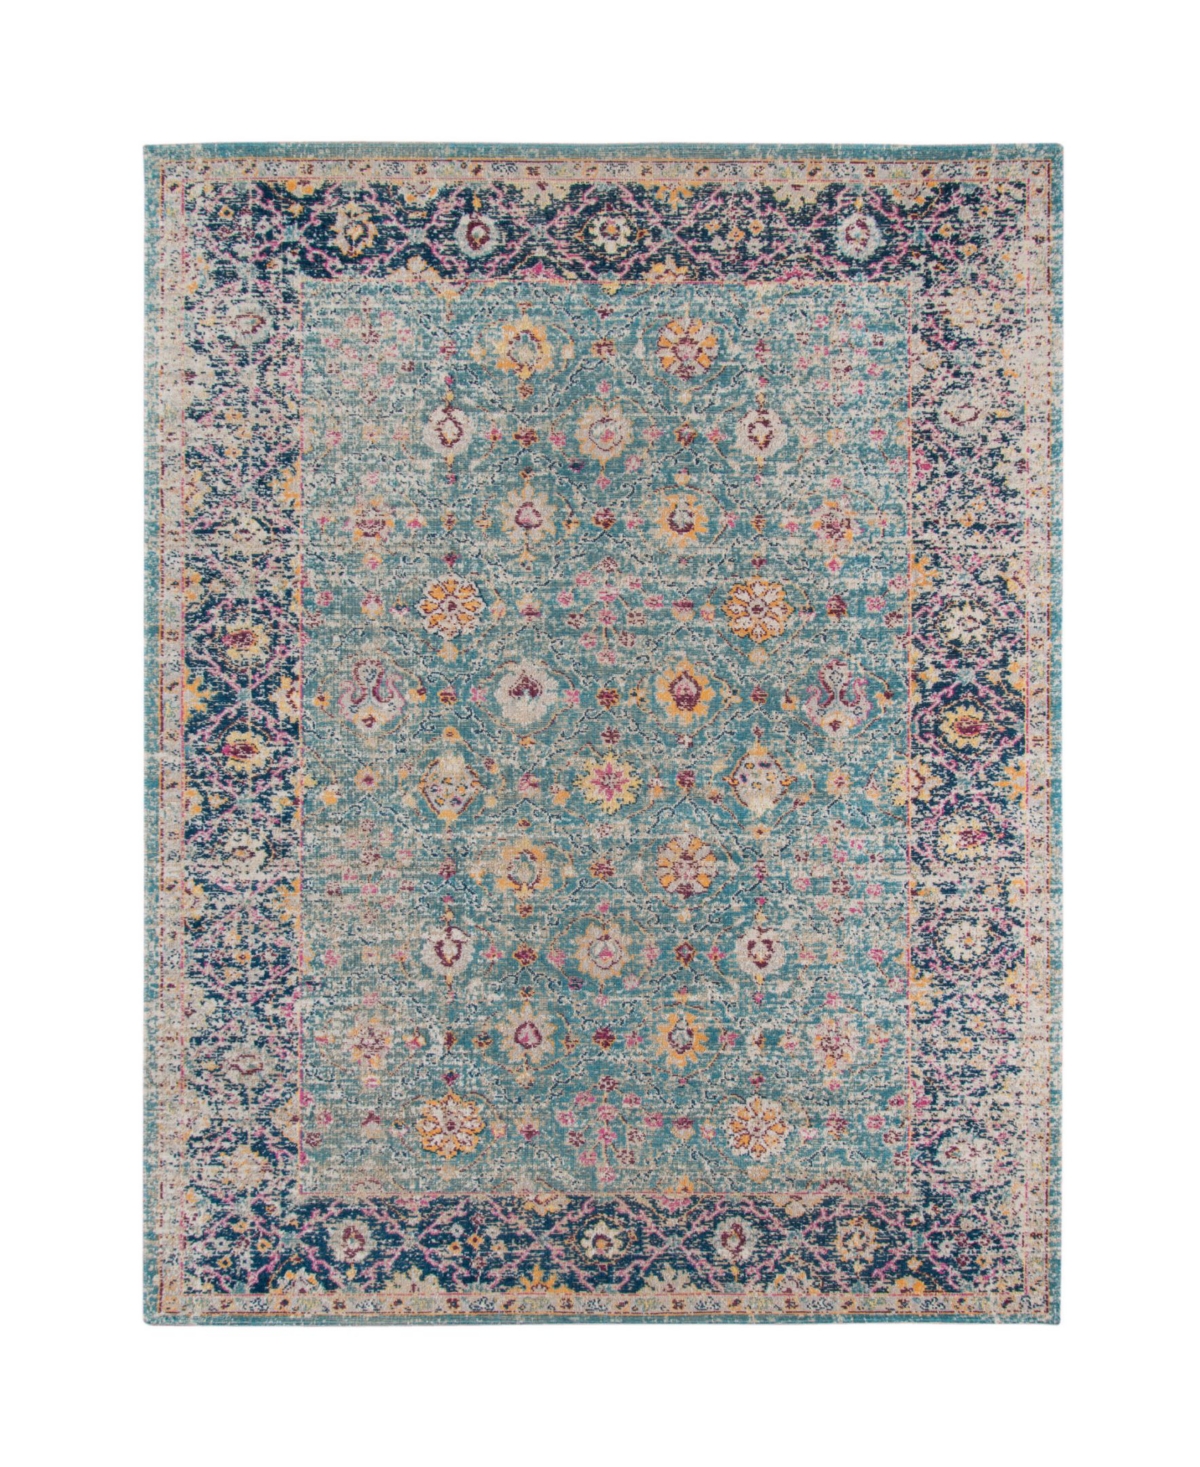 AMER RUGS ETERNAL ETE-28 TURQUOISE 5'7" X 7'6" AREA RUG